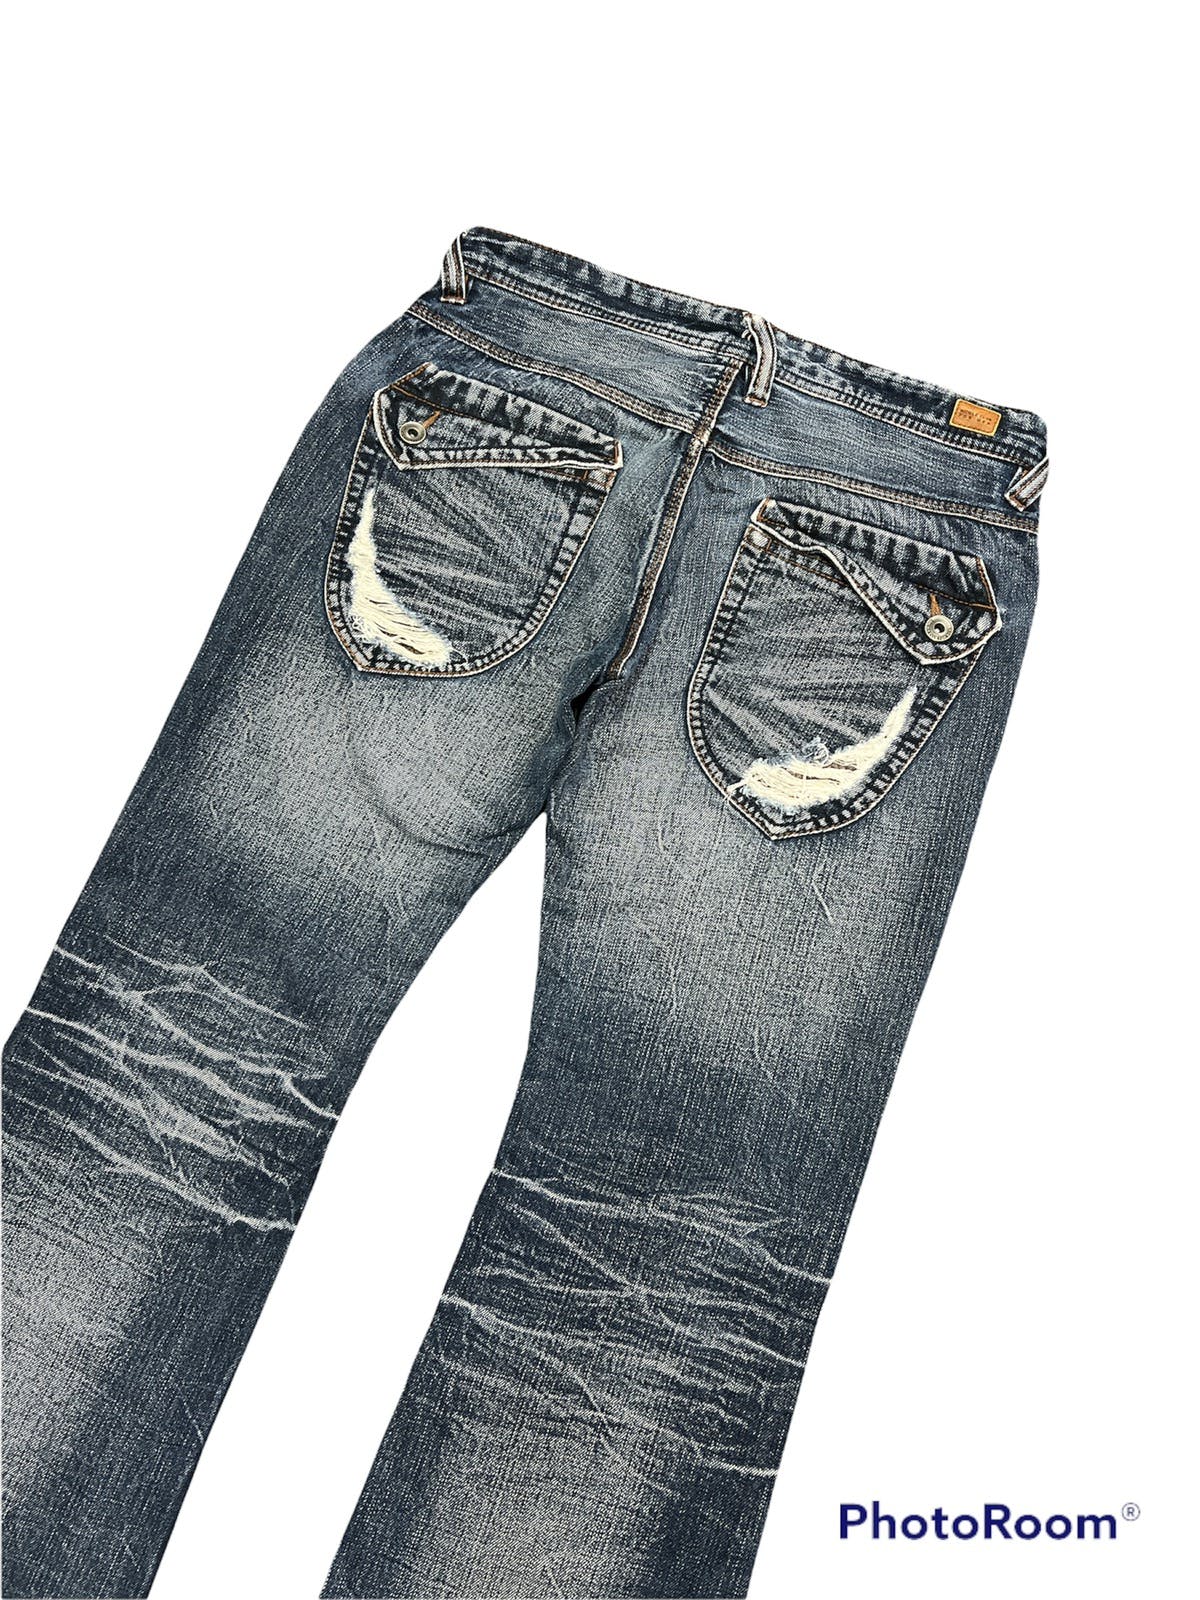 Distressed Japan Blue Flare by Nicole Club For Men Denim - 6